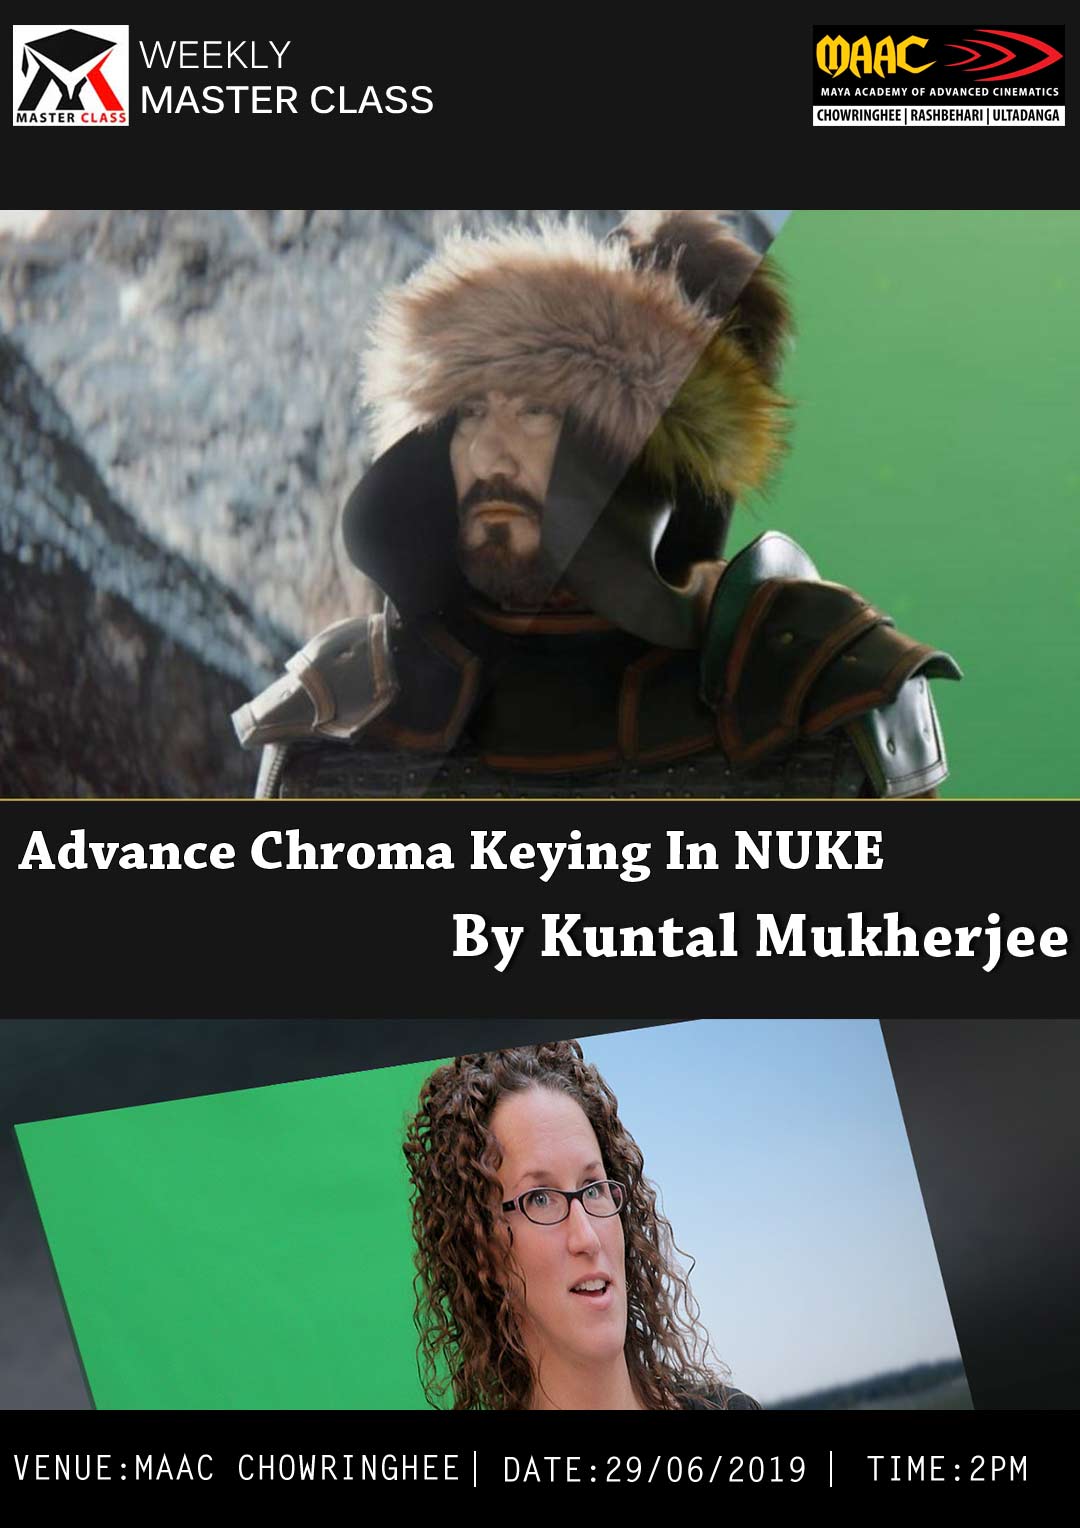 Weekly Master Class on Advance Chroma Keying in Nuke